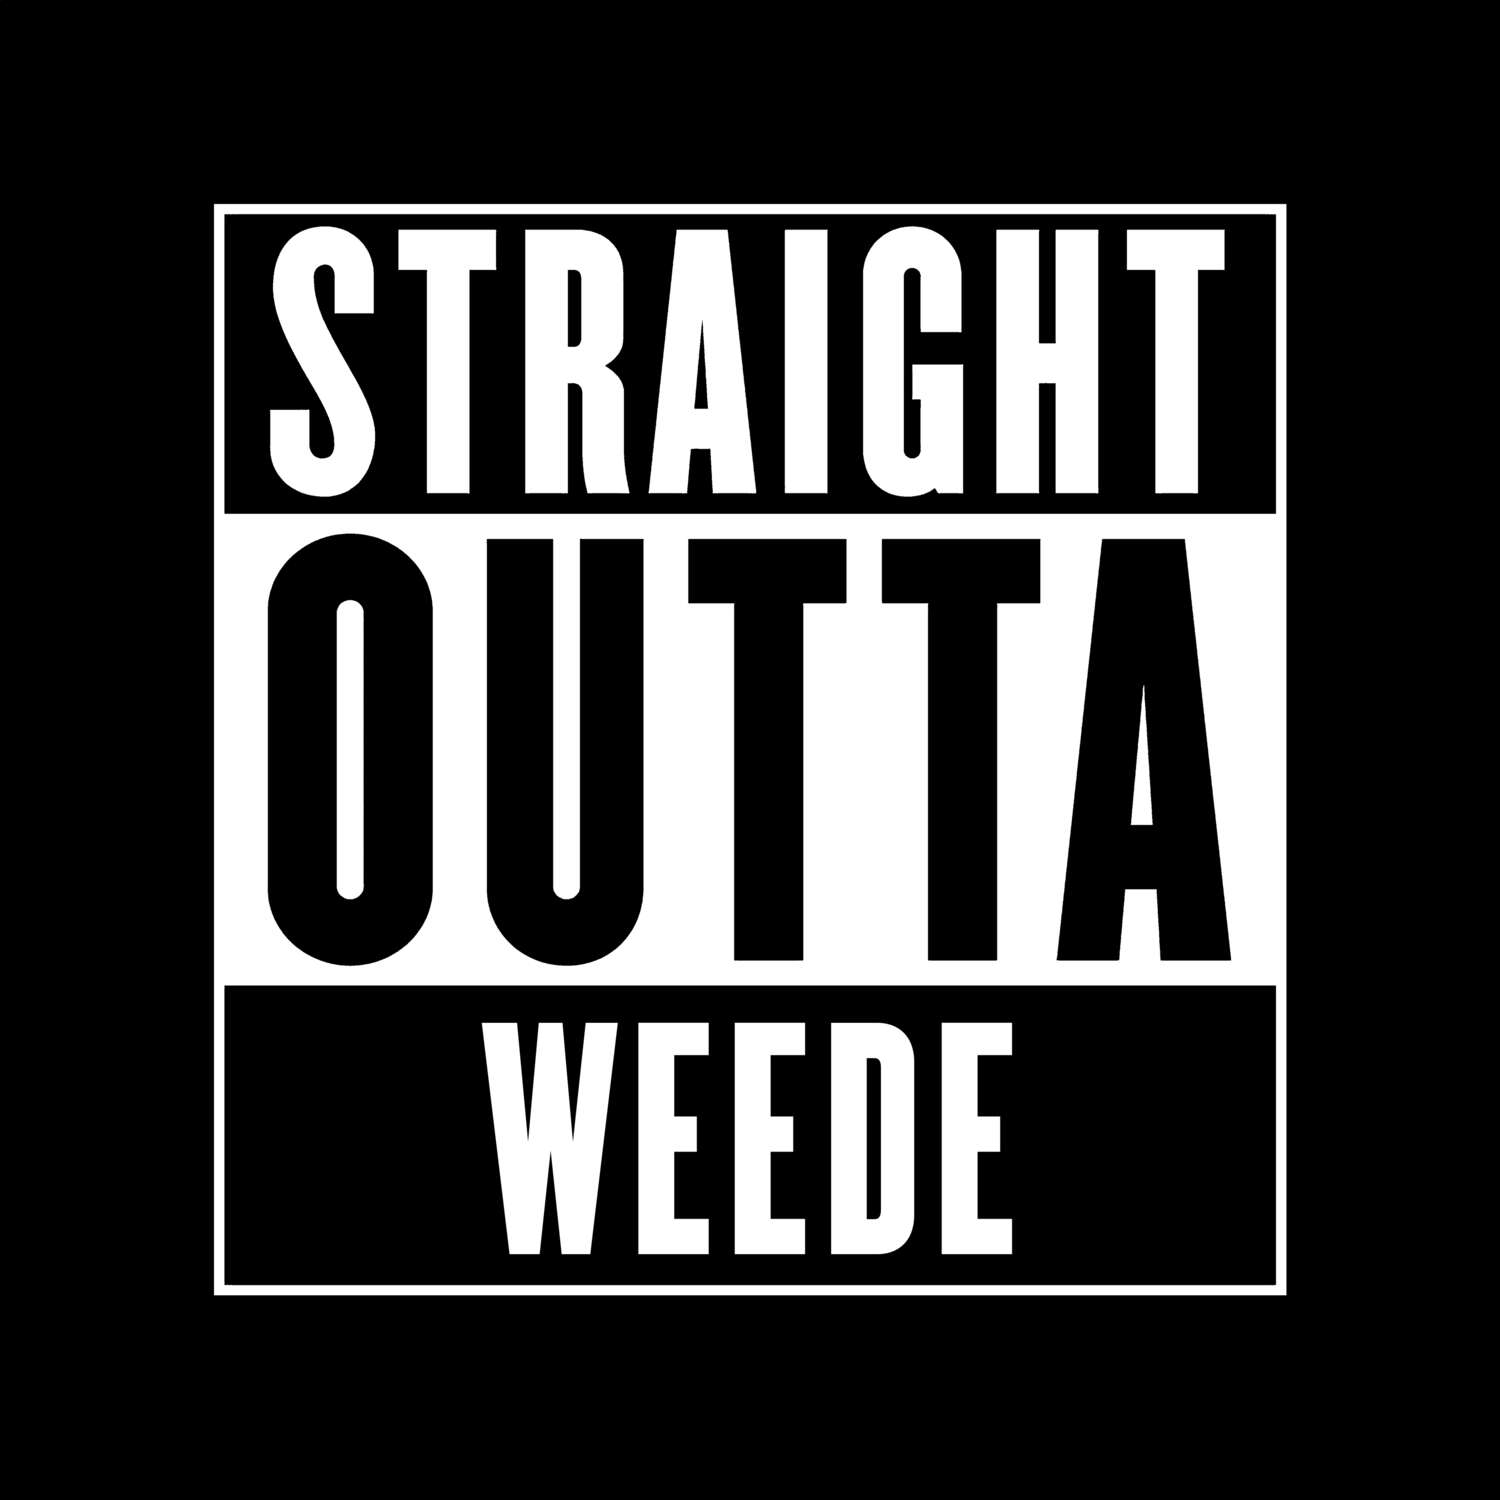 Weede T-Shirt »Straight Outta«